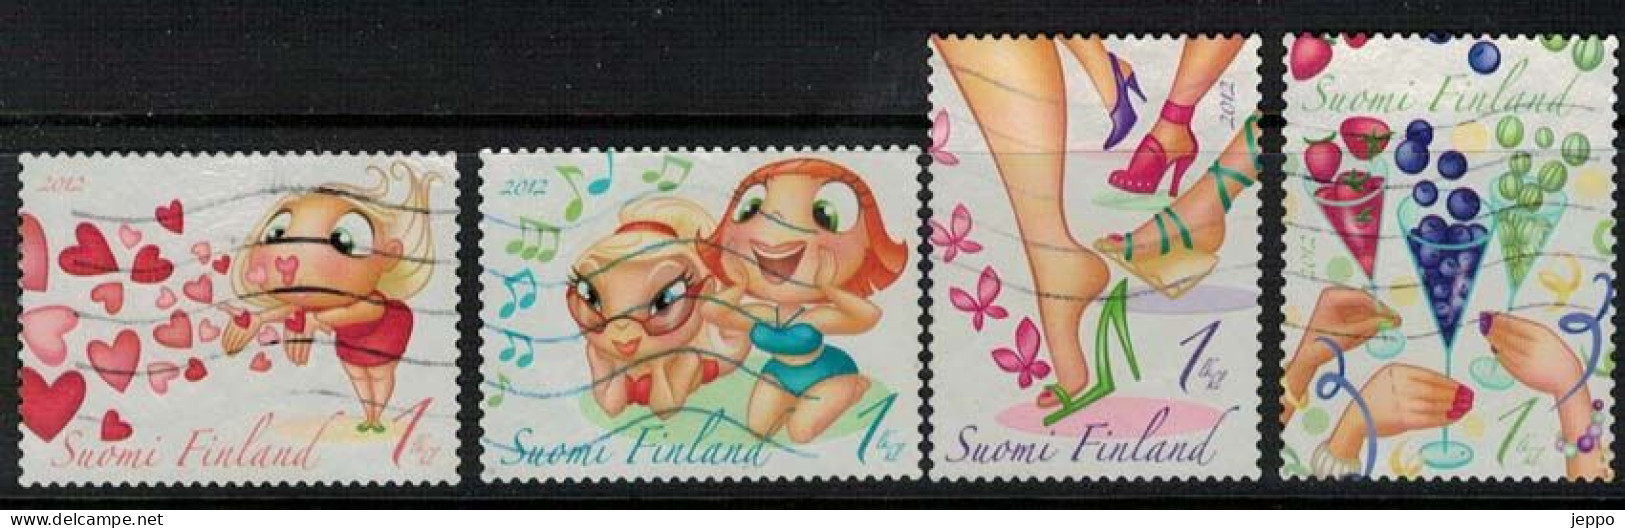 2012 Finland, Kisses Blown, Complete Set Used. - Used Stamps